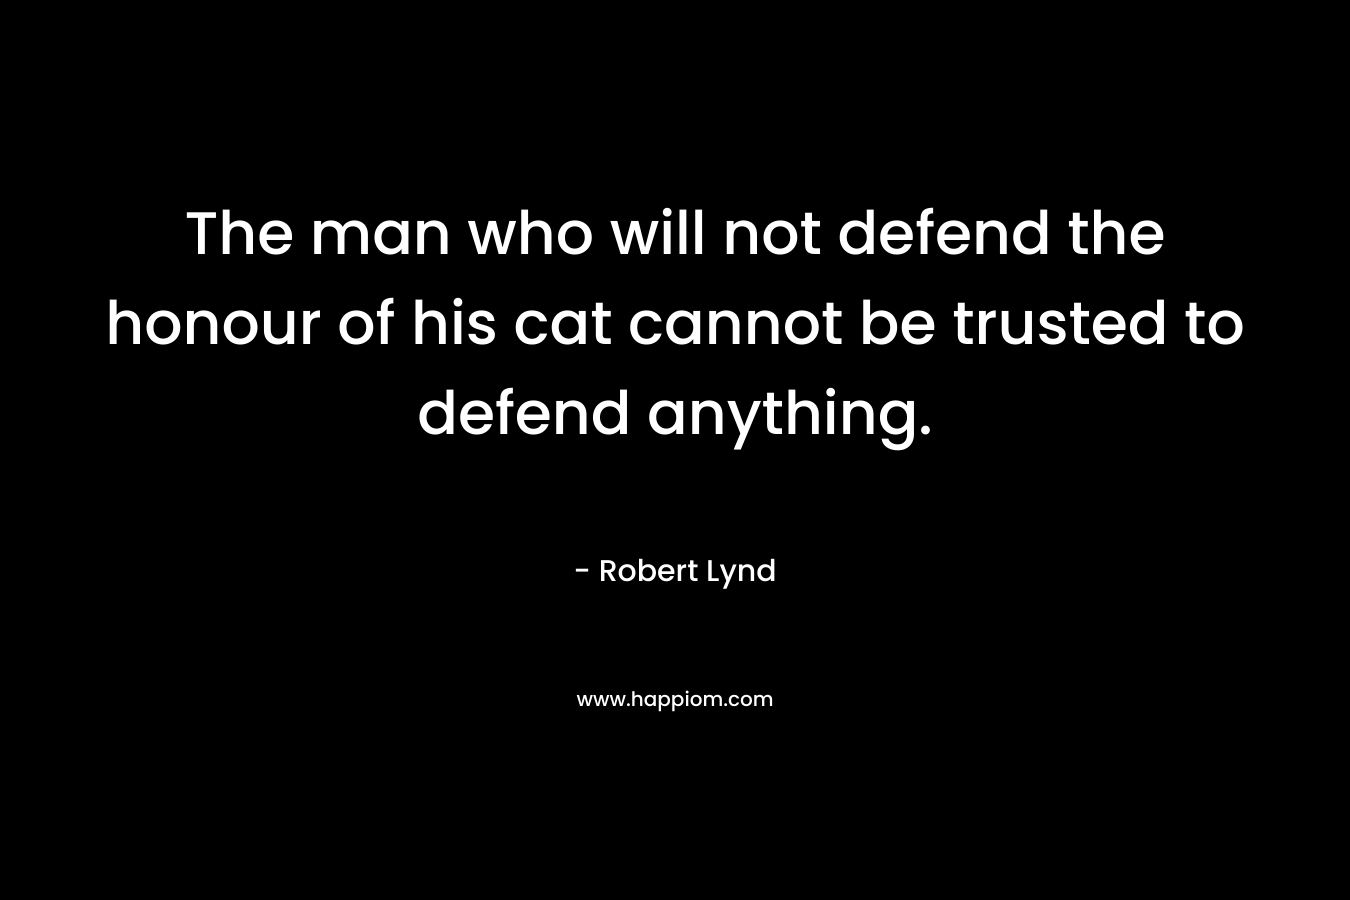 The man who will not defend the honour of his cat cannot be trusted to defend anything. – Robert Lynd